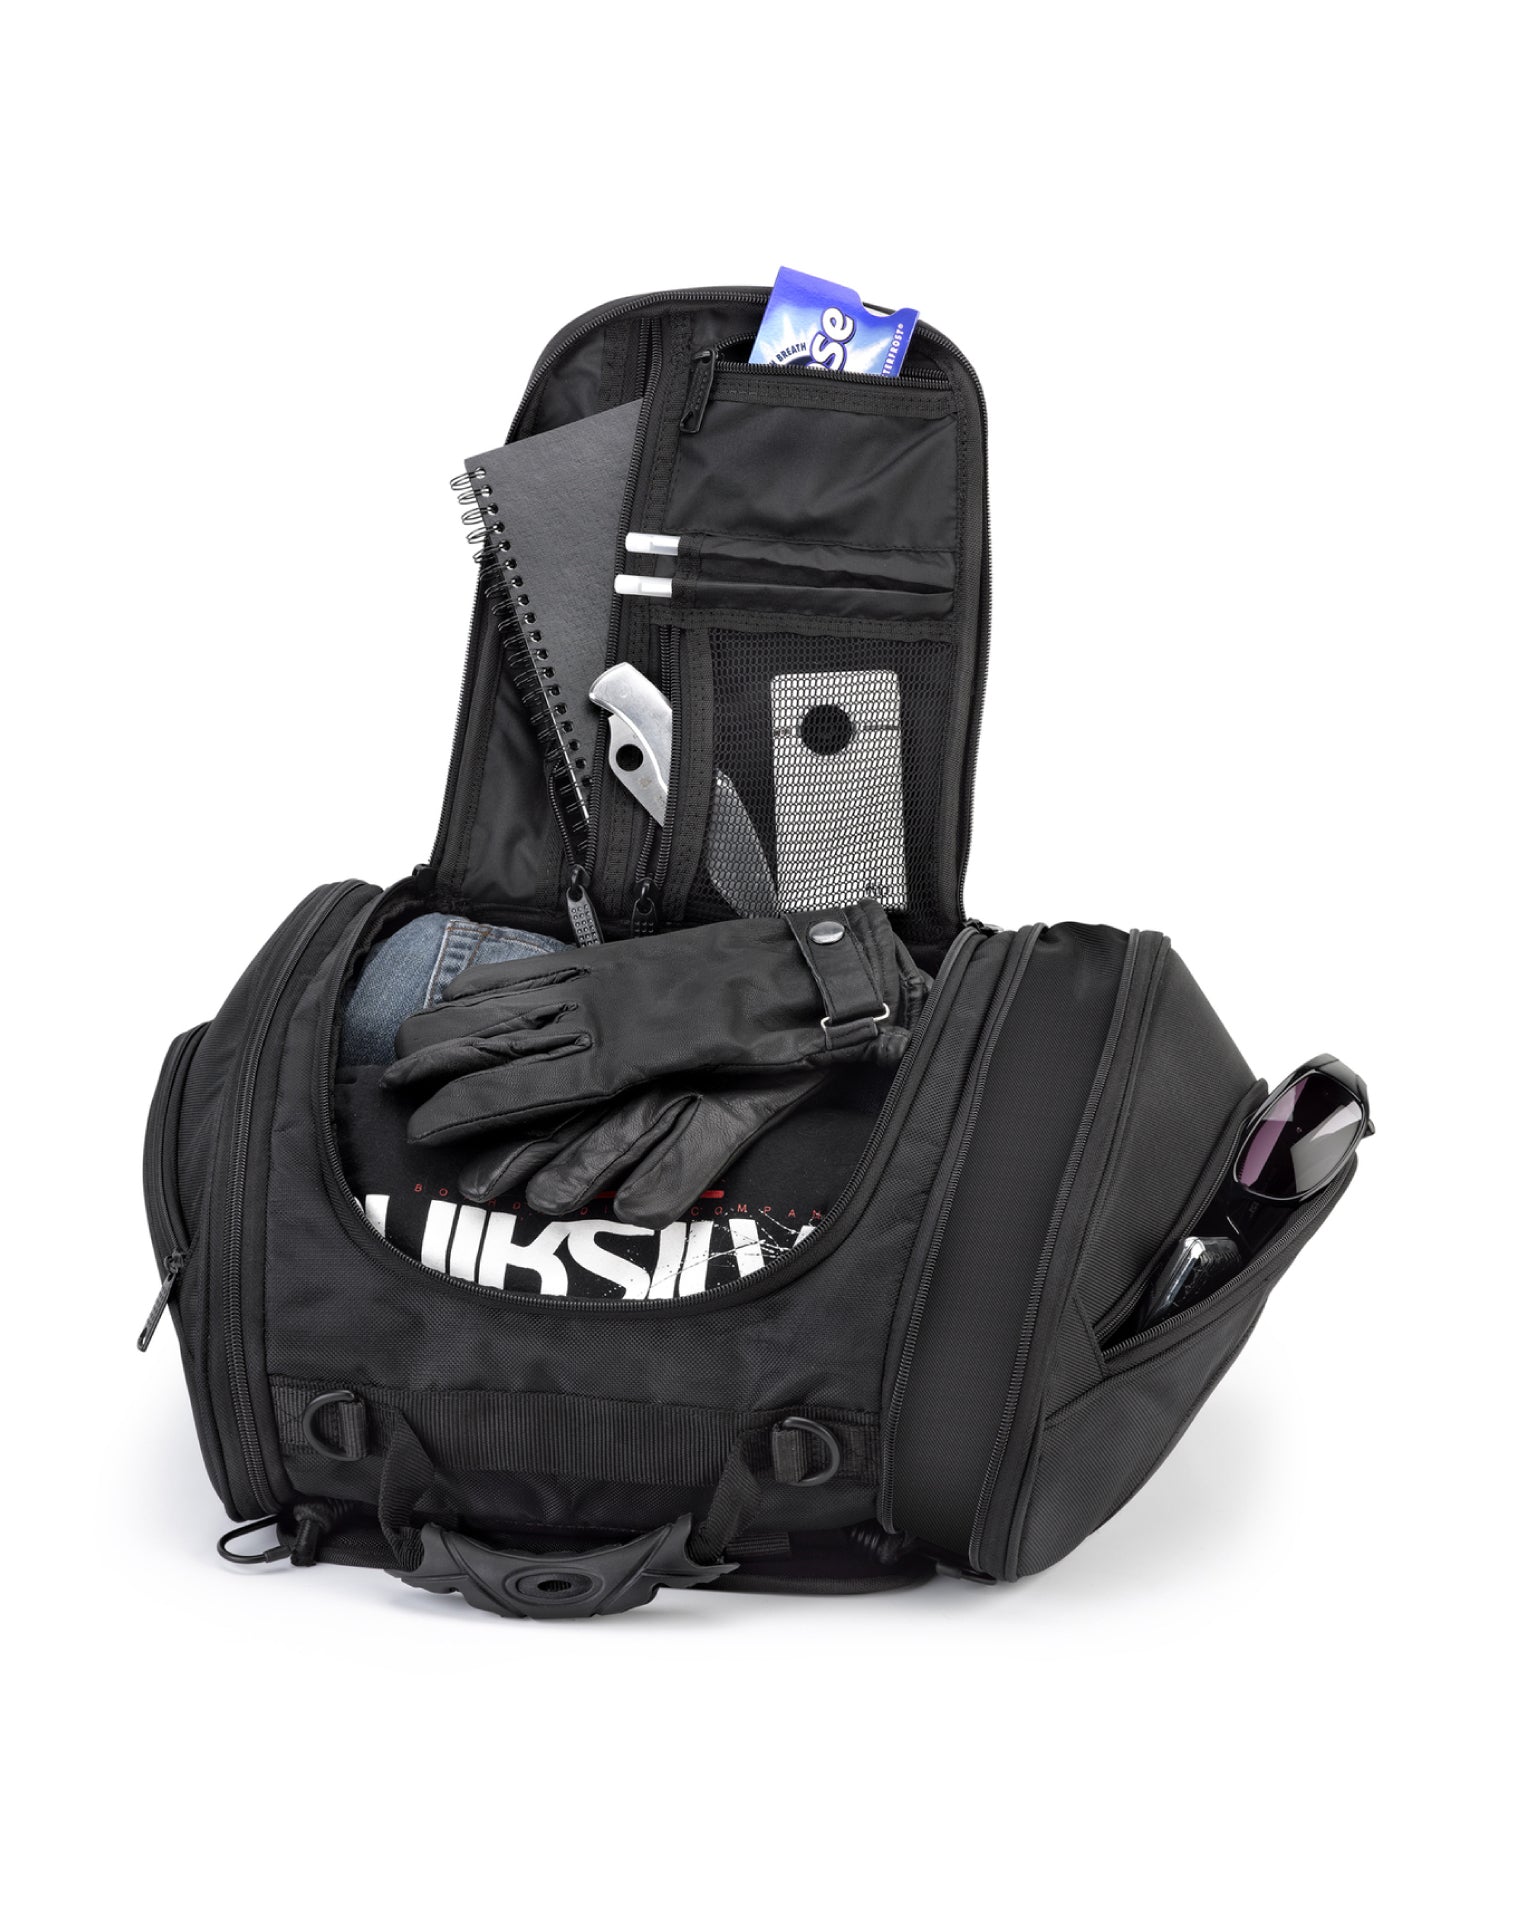 Viking AXE Small Hysoung Motorcycle Tail Bag Storage View